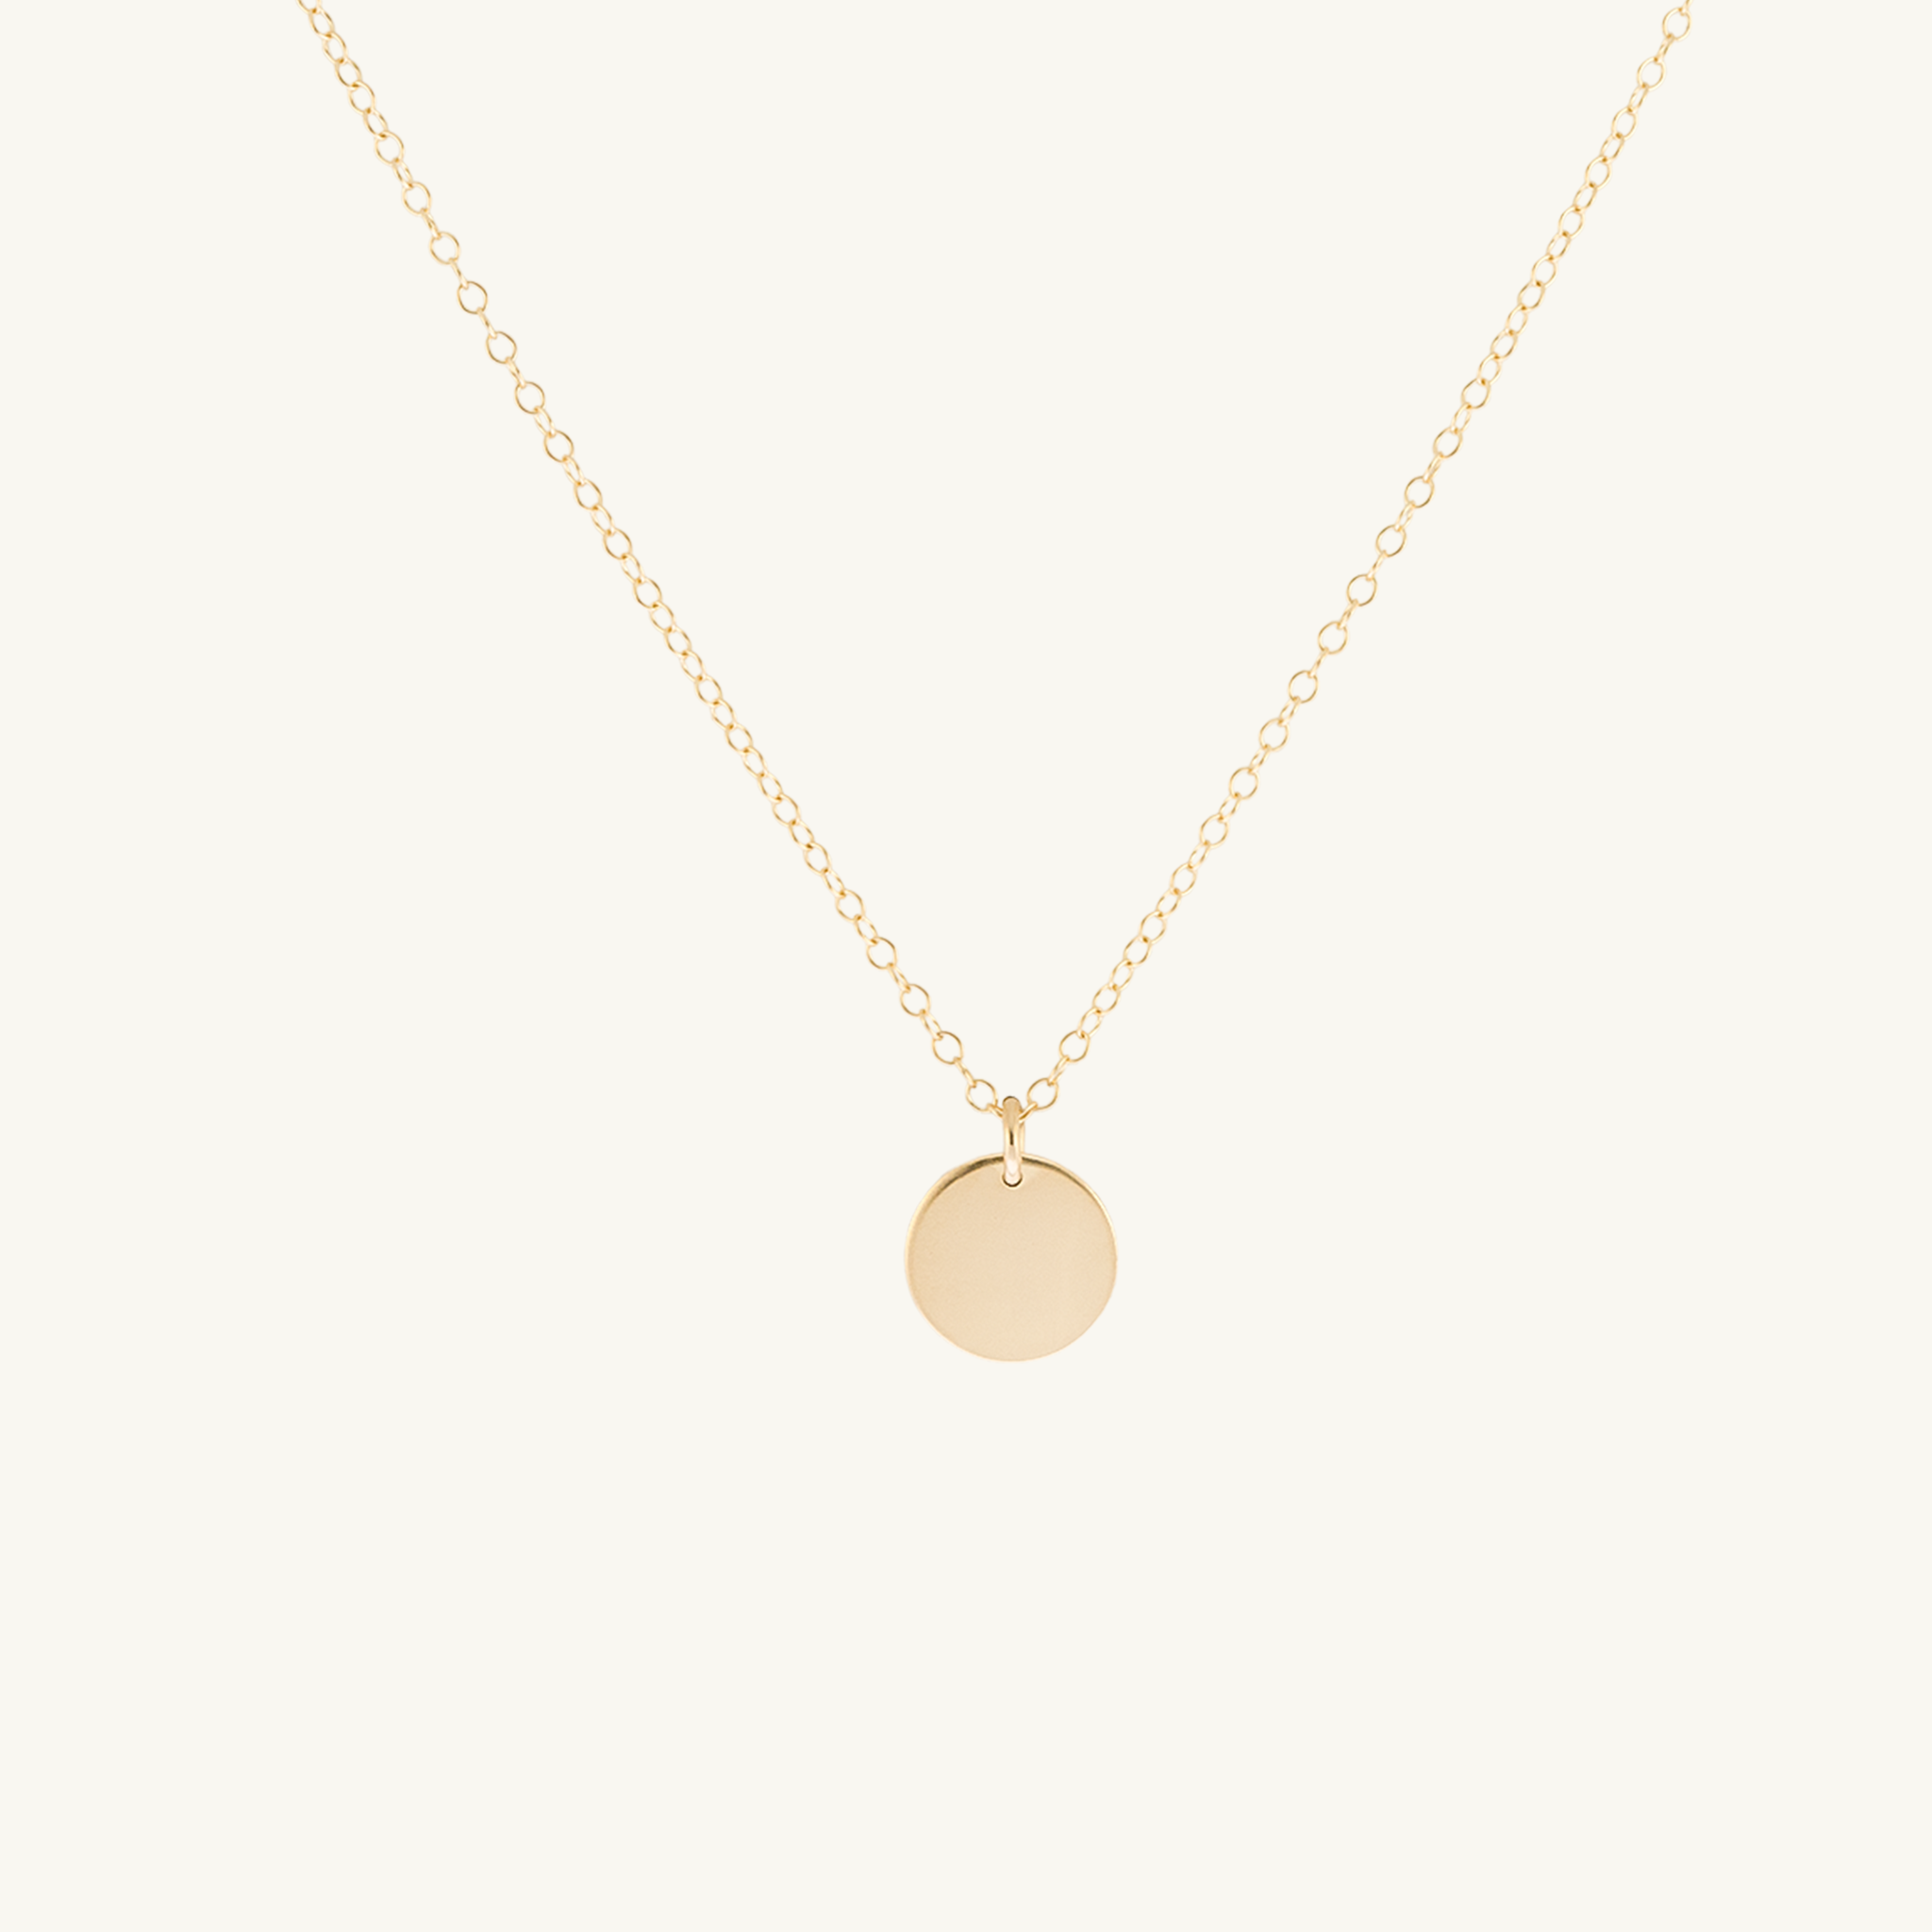 Sarah Cameron Jewelry Coin Necklace 14k Gold Filled